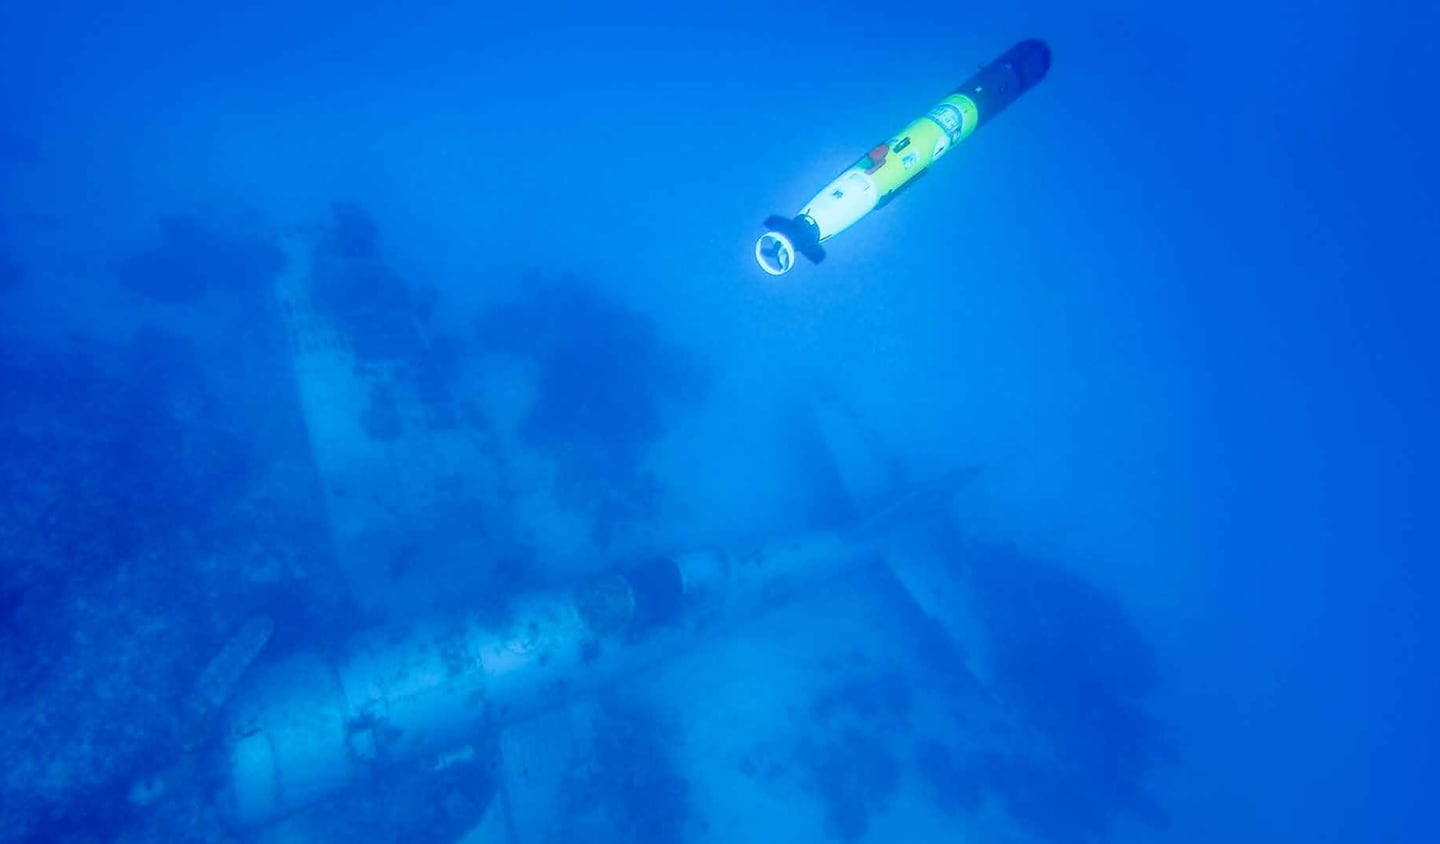 A REMUS Unmanned Underwater Vehicle (UUV) surveying a missing Corsair aircraft in the western lagoon of the Republic of Palau. The UUV is equipped with side scan sonar to allow for mapping of the seabed even in poor water visibility, with variants of the same robotic technology in use by the US Navy. Subsequent forensic analysis of the Corsair by Project Recover found the data plates of the aircraft. Research of historical war records determined the plane was based from VMF-122 and shot down Nov. 21, 1944; the pilot safely escaped, swam outside the lagoon, and was recovered  by a rescue seaplane from his squadron.